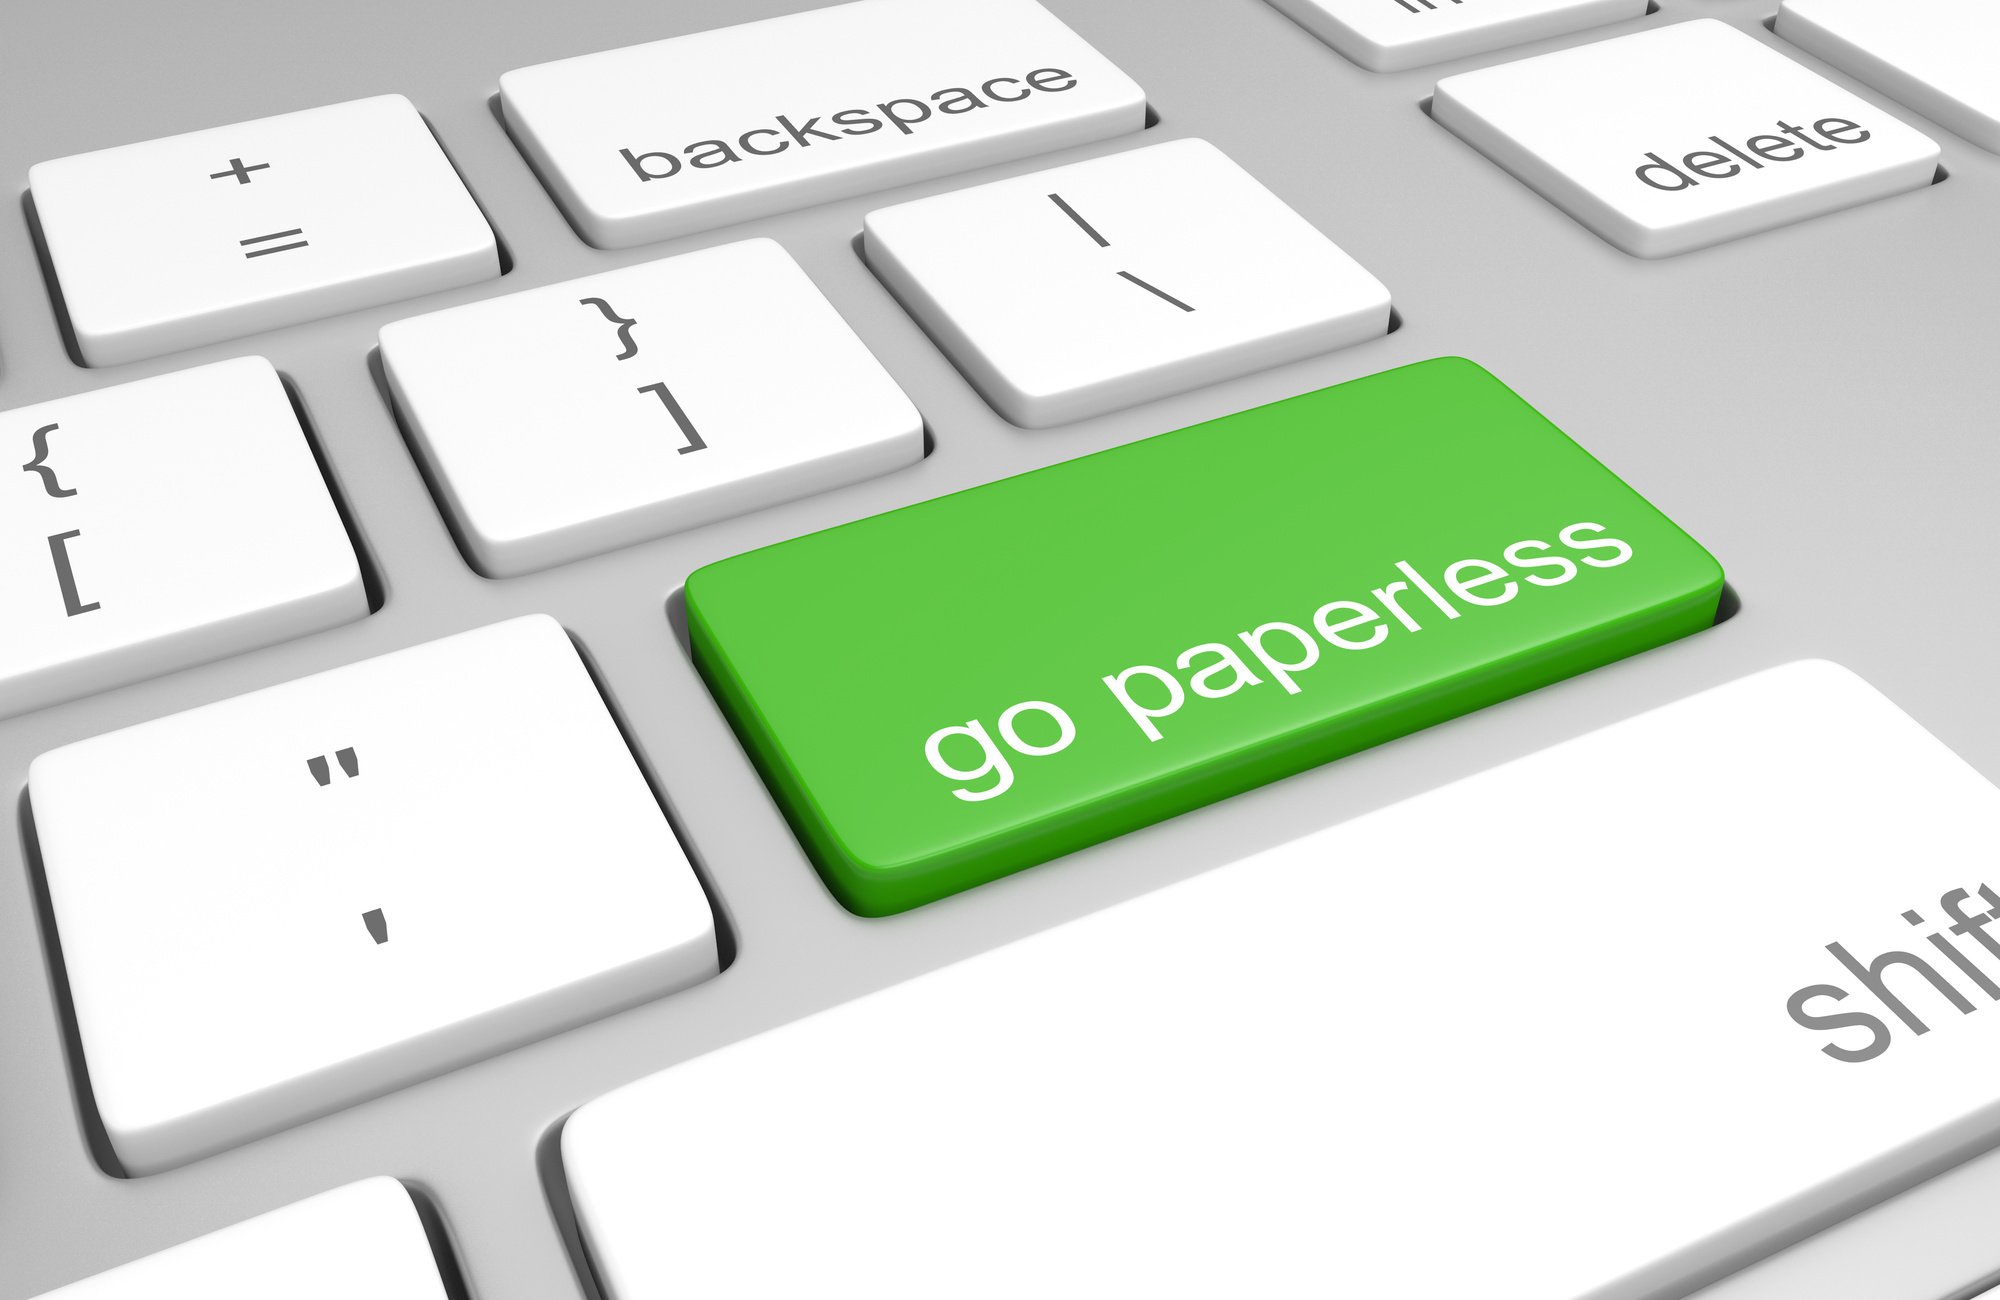 going paperless in the office